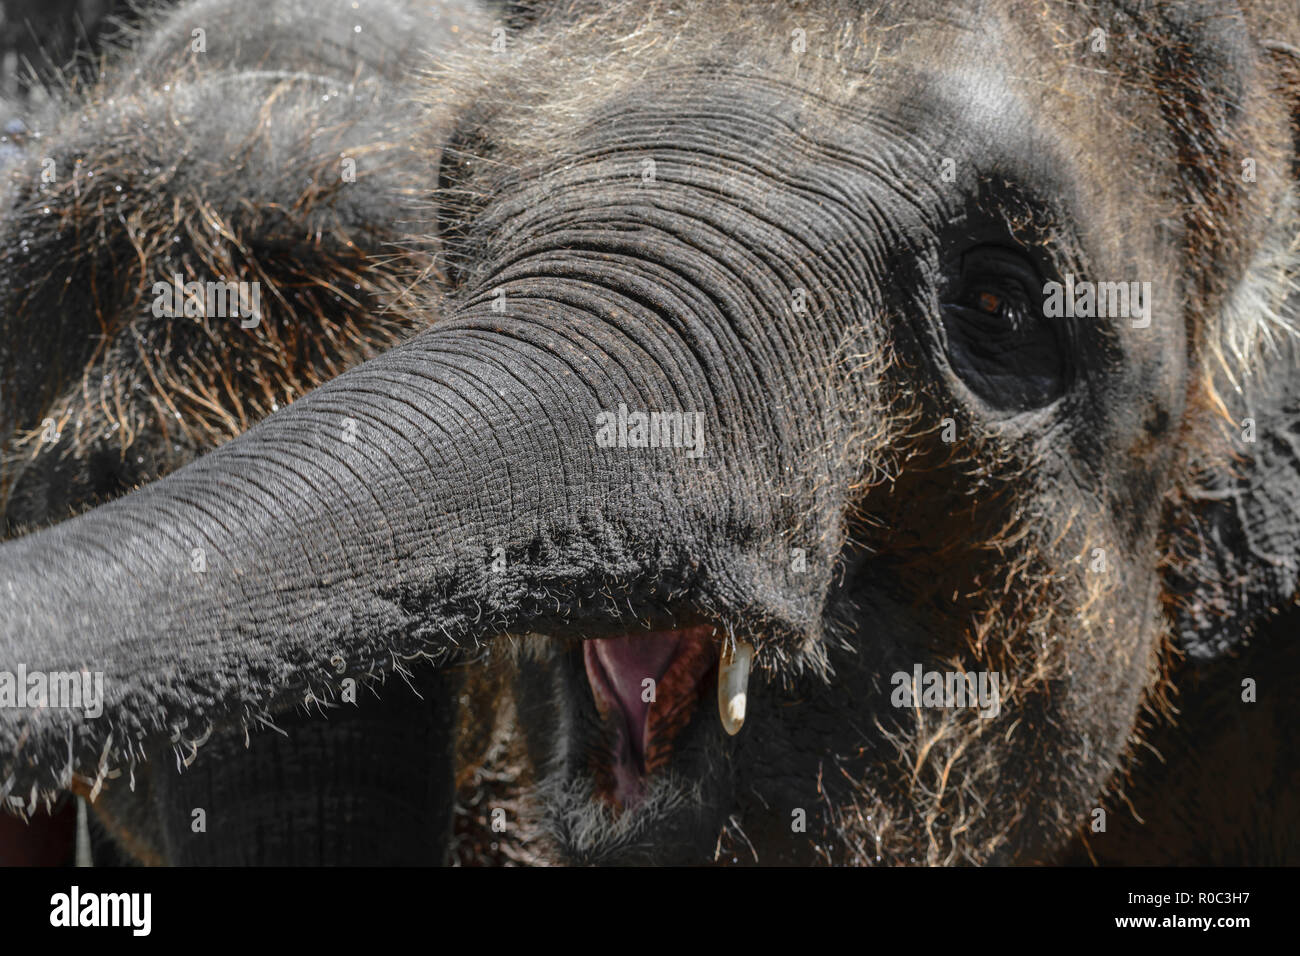 Two young and hairy Sumatra elephants trying to reach something with trunks Stock Photo